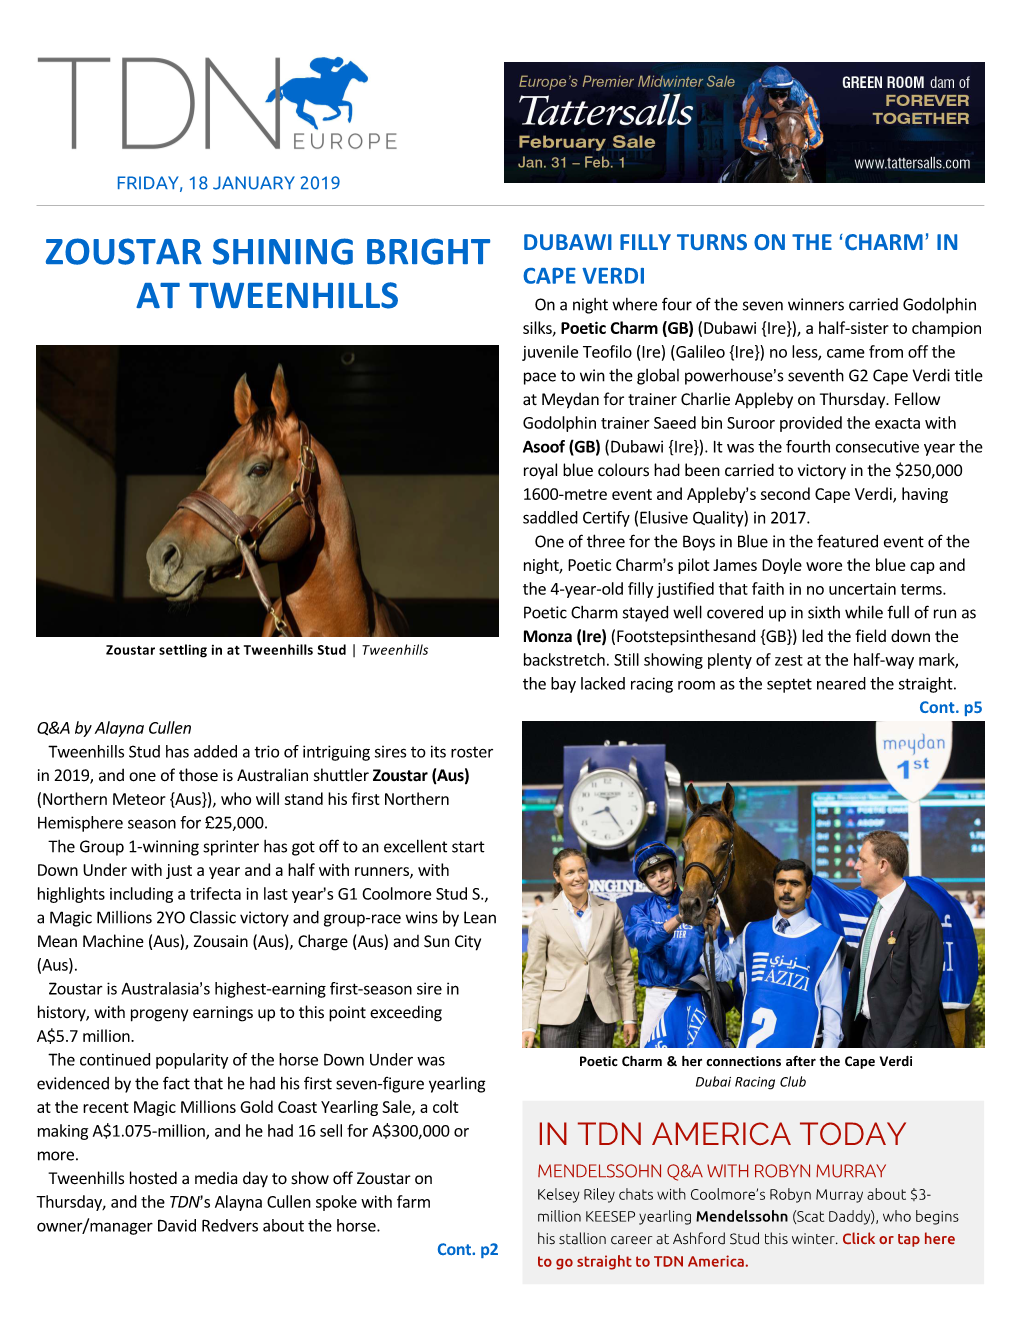 Zoustar Shining Bright at Tweenhills Cont